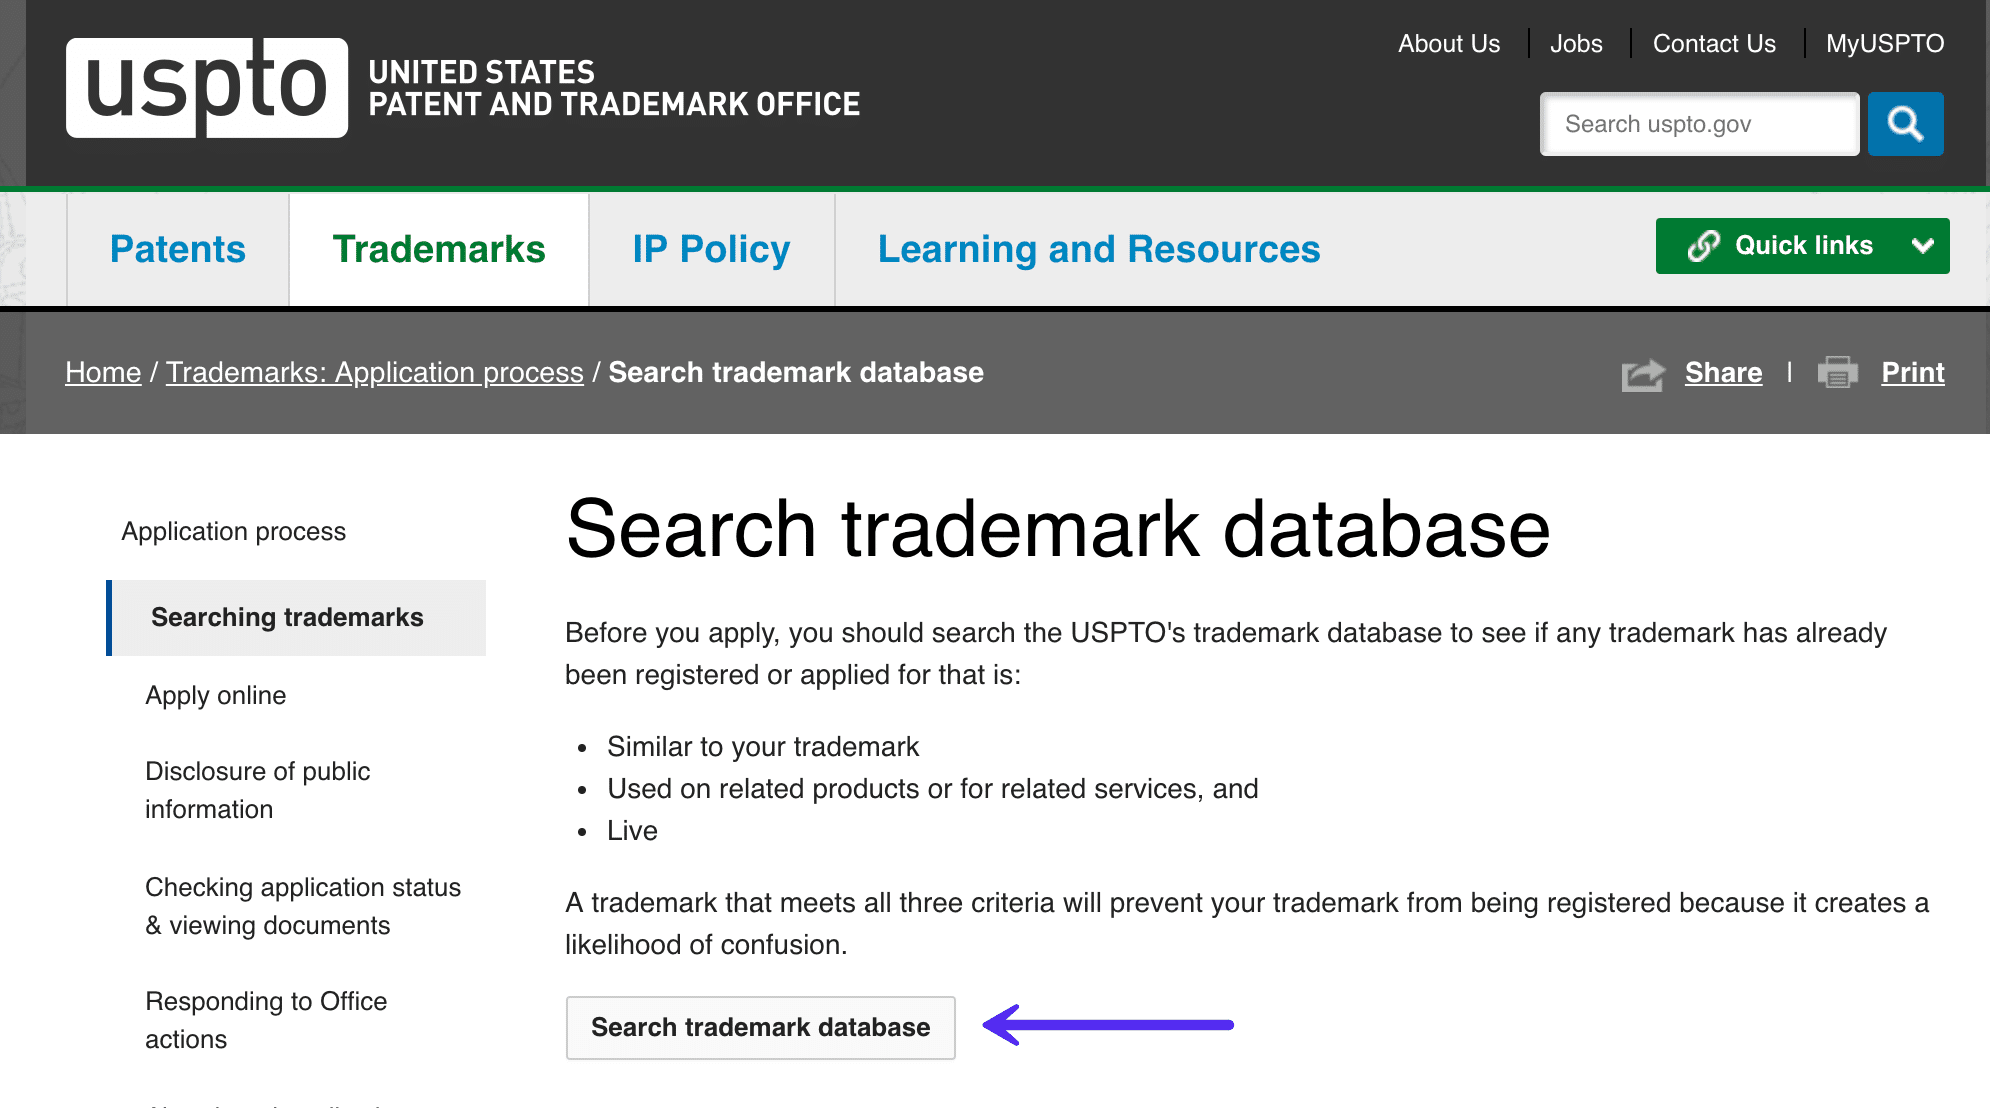 Search trademark database